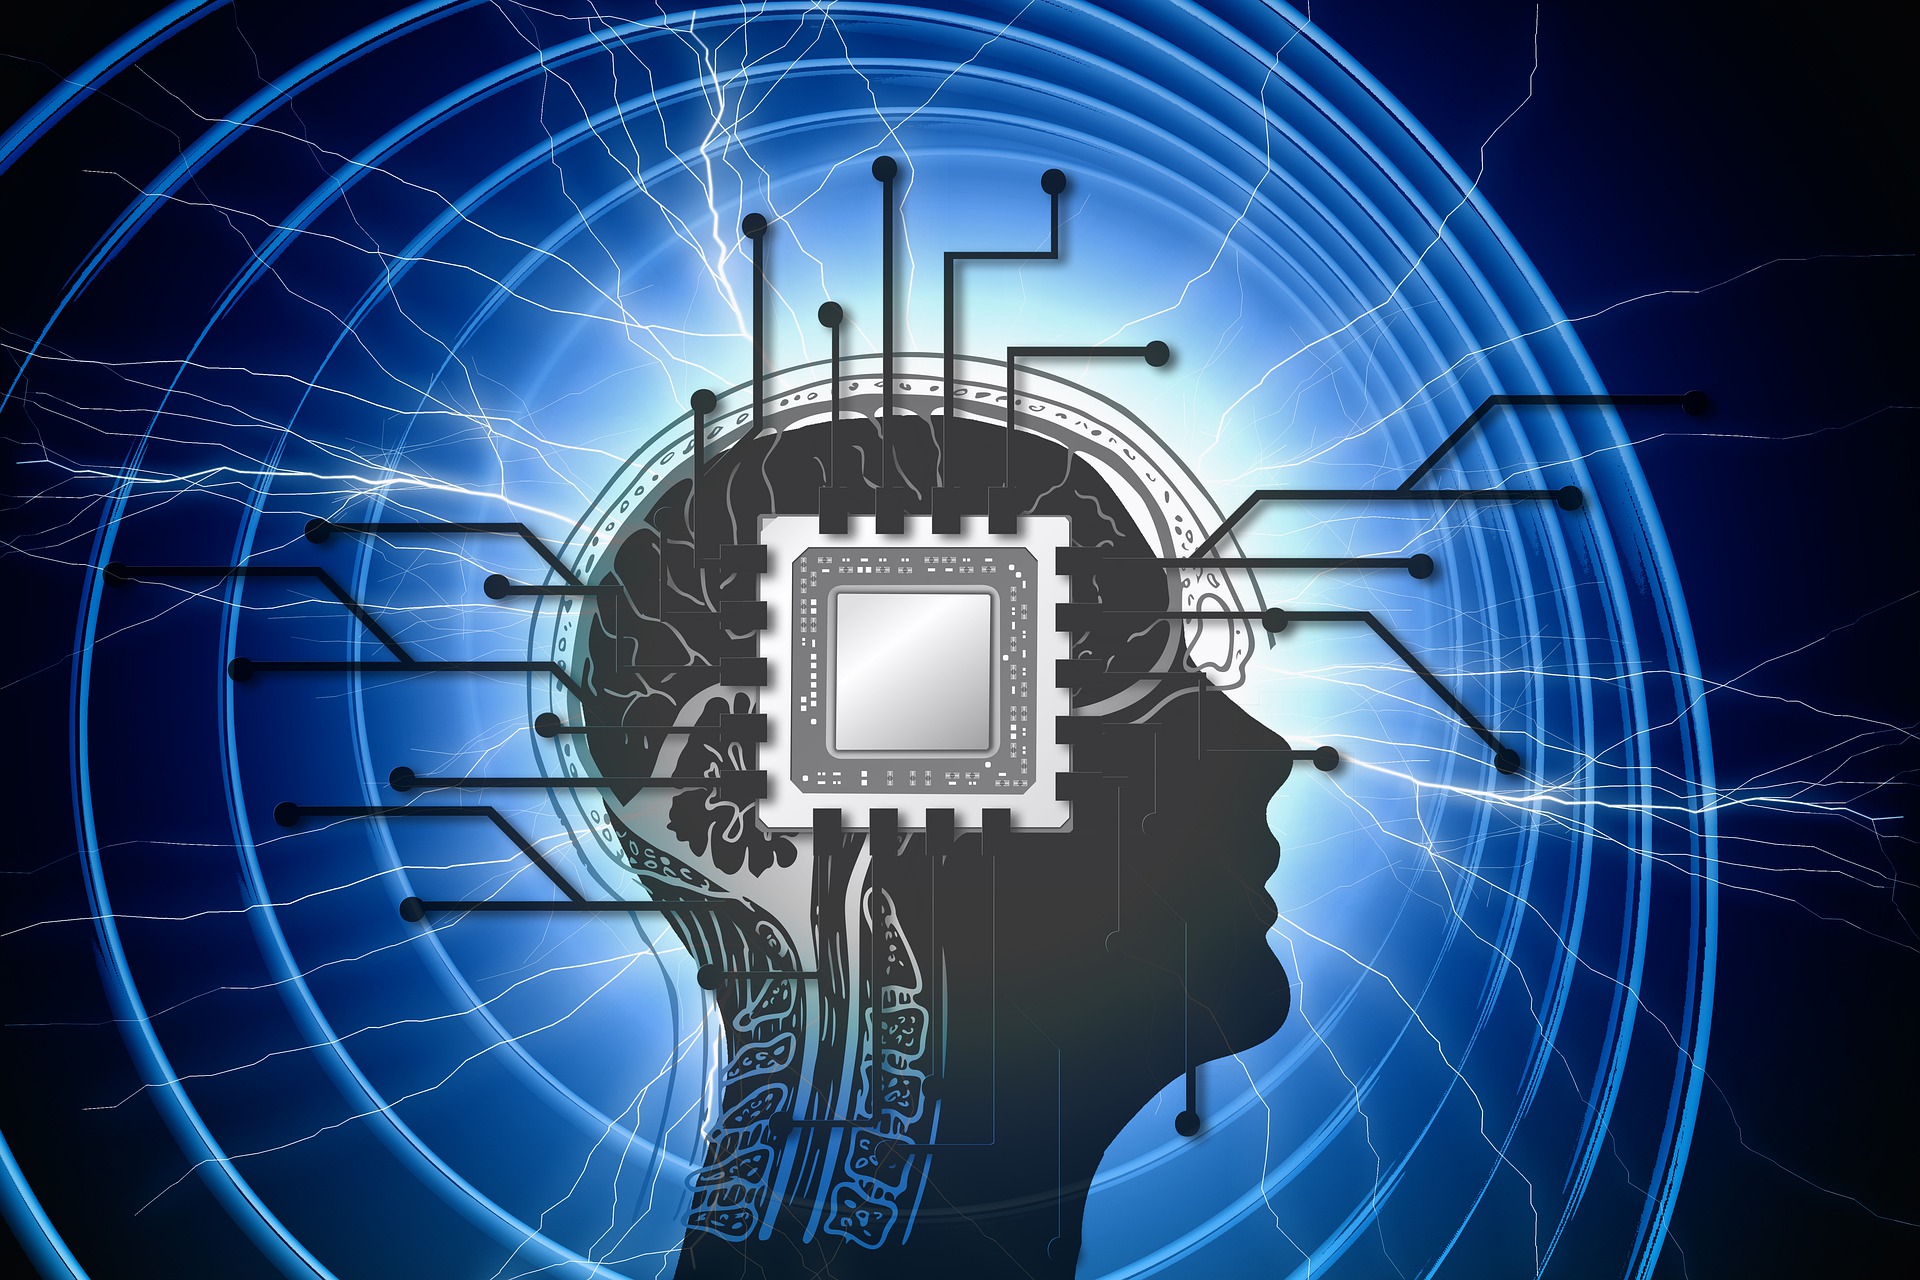 Is the Brain a Quantum Computer (Image by Gerd Altmann from Pixabay)